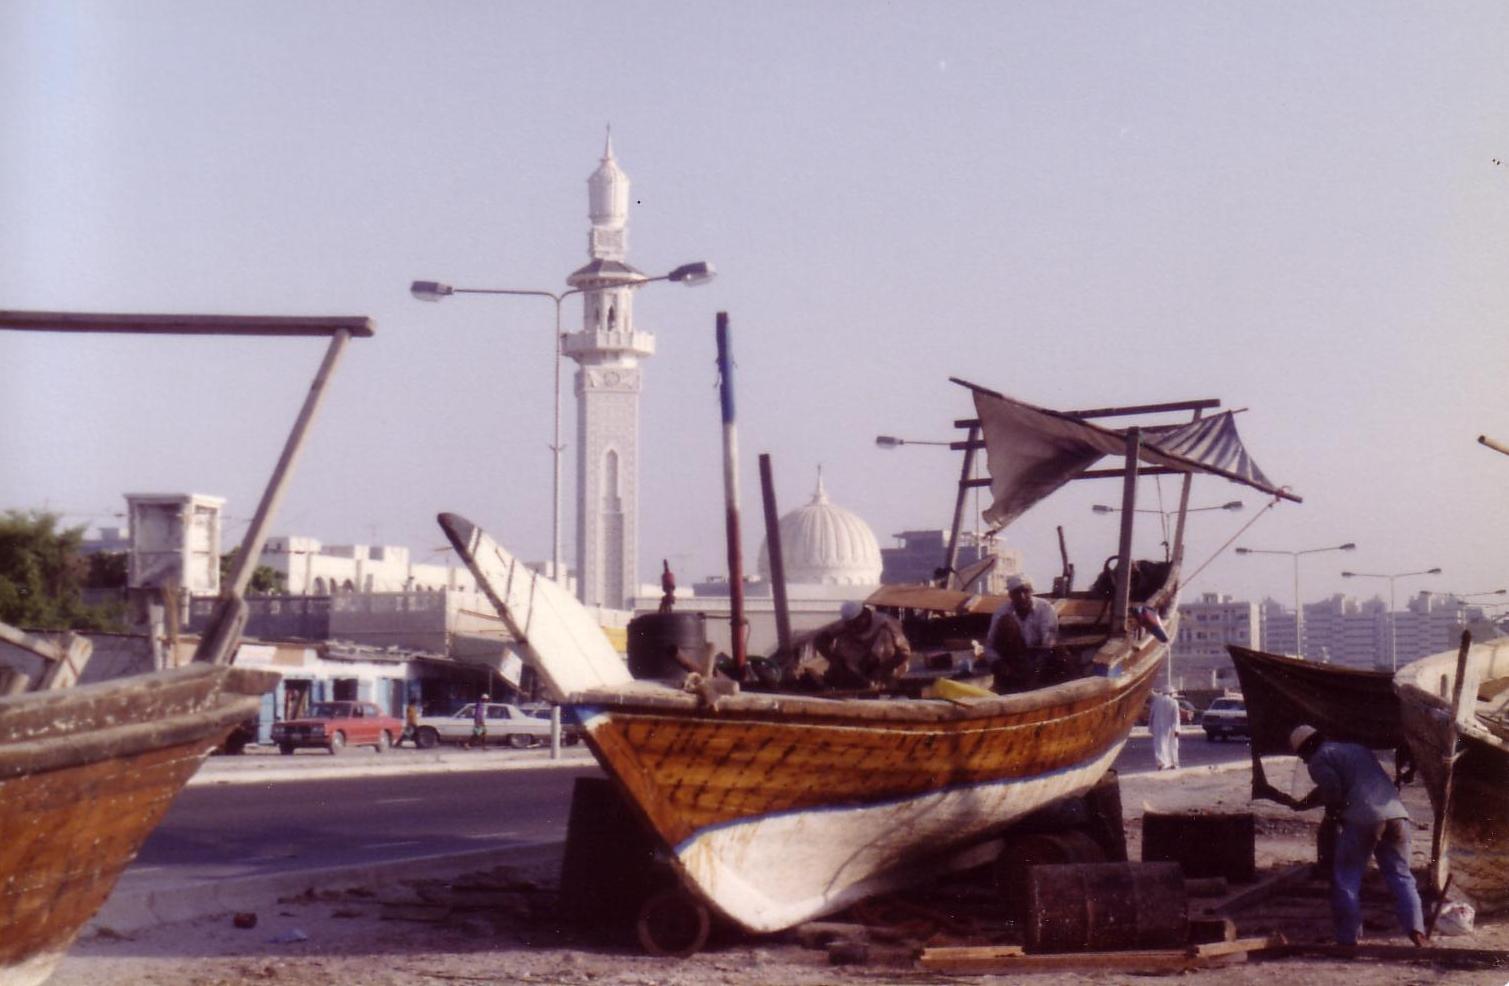 Repairing dhows on Sharjah seafront